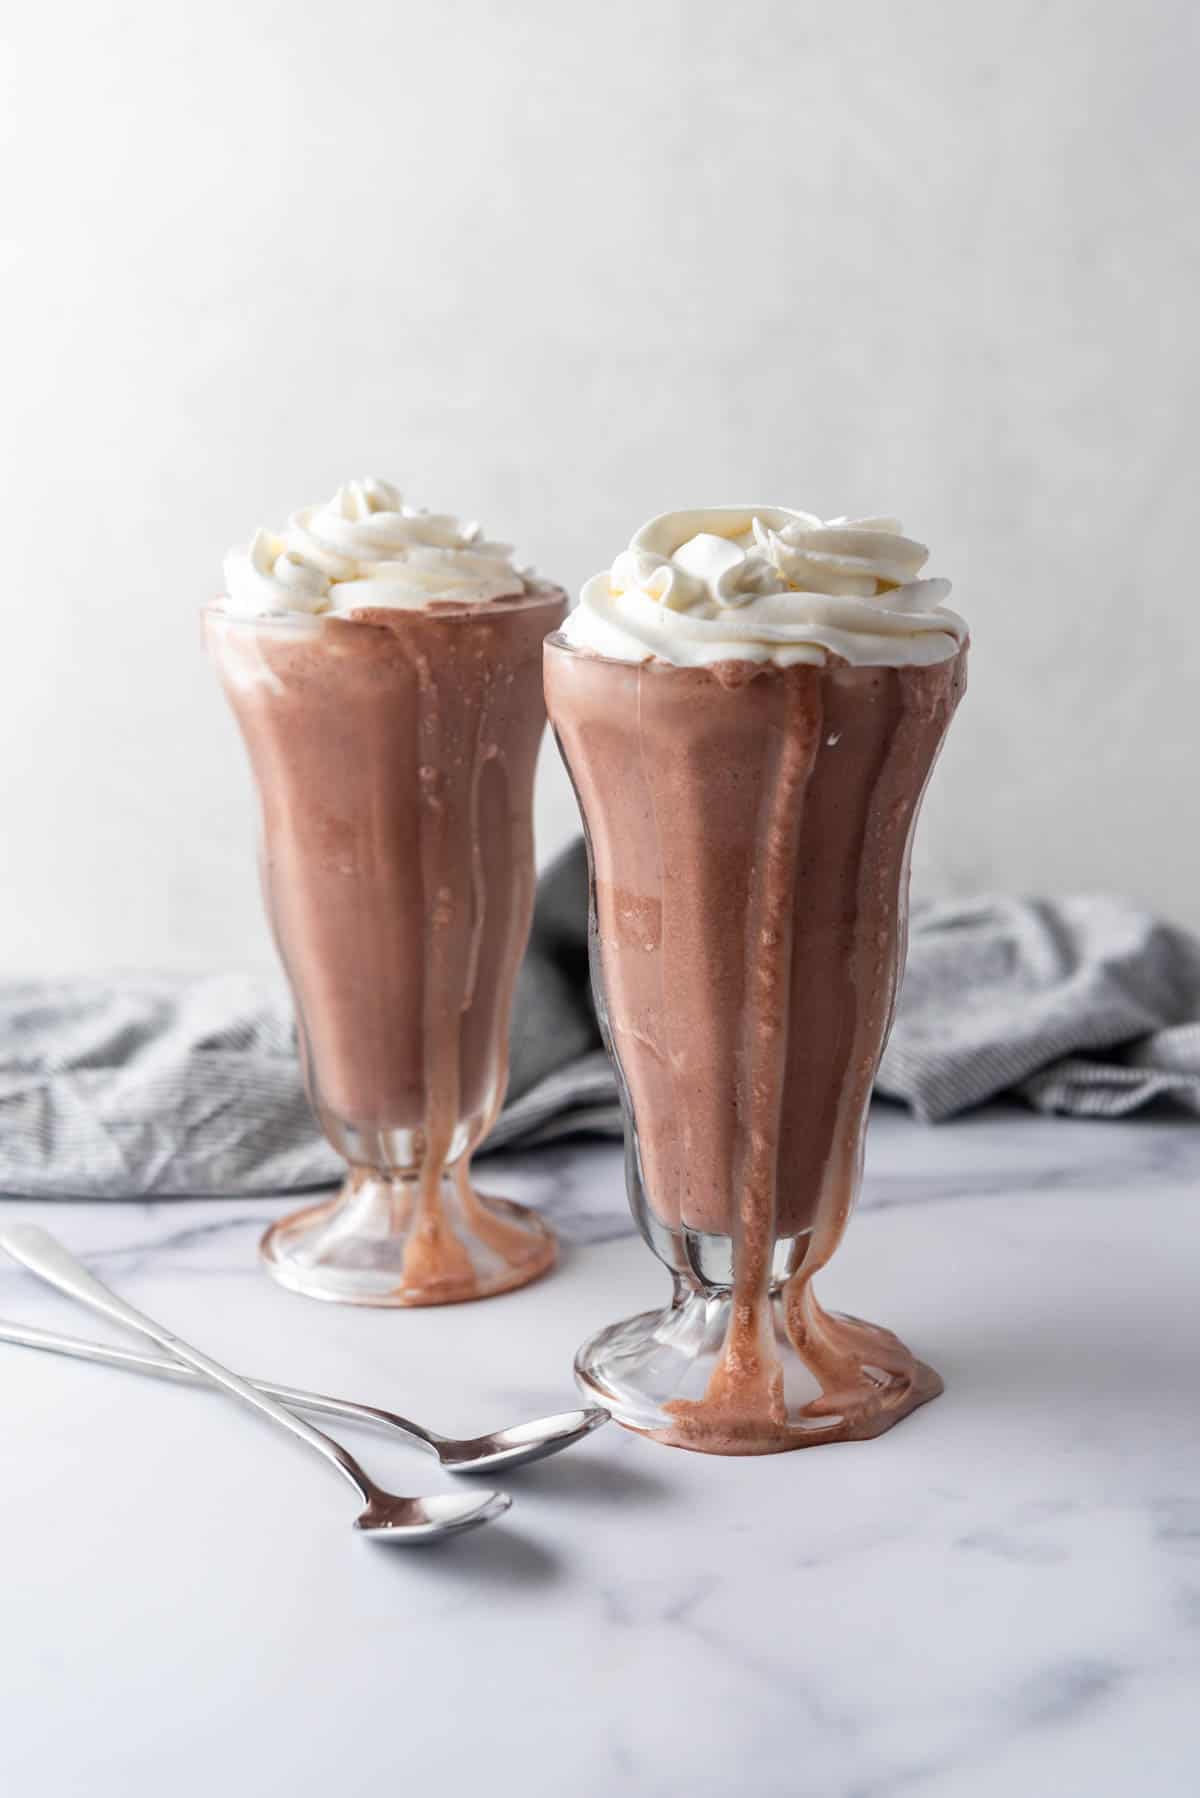 Two chocolate milkshakes with whipped cream on top.